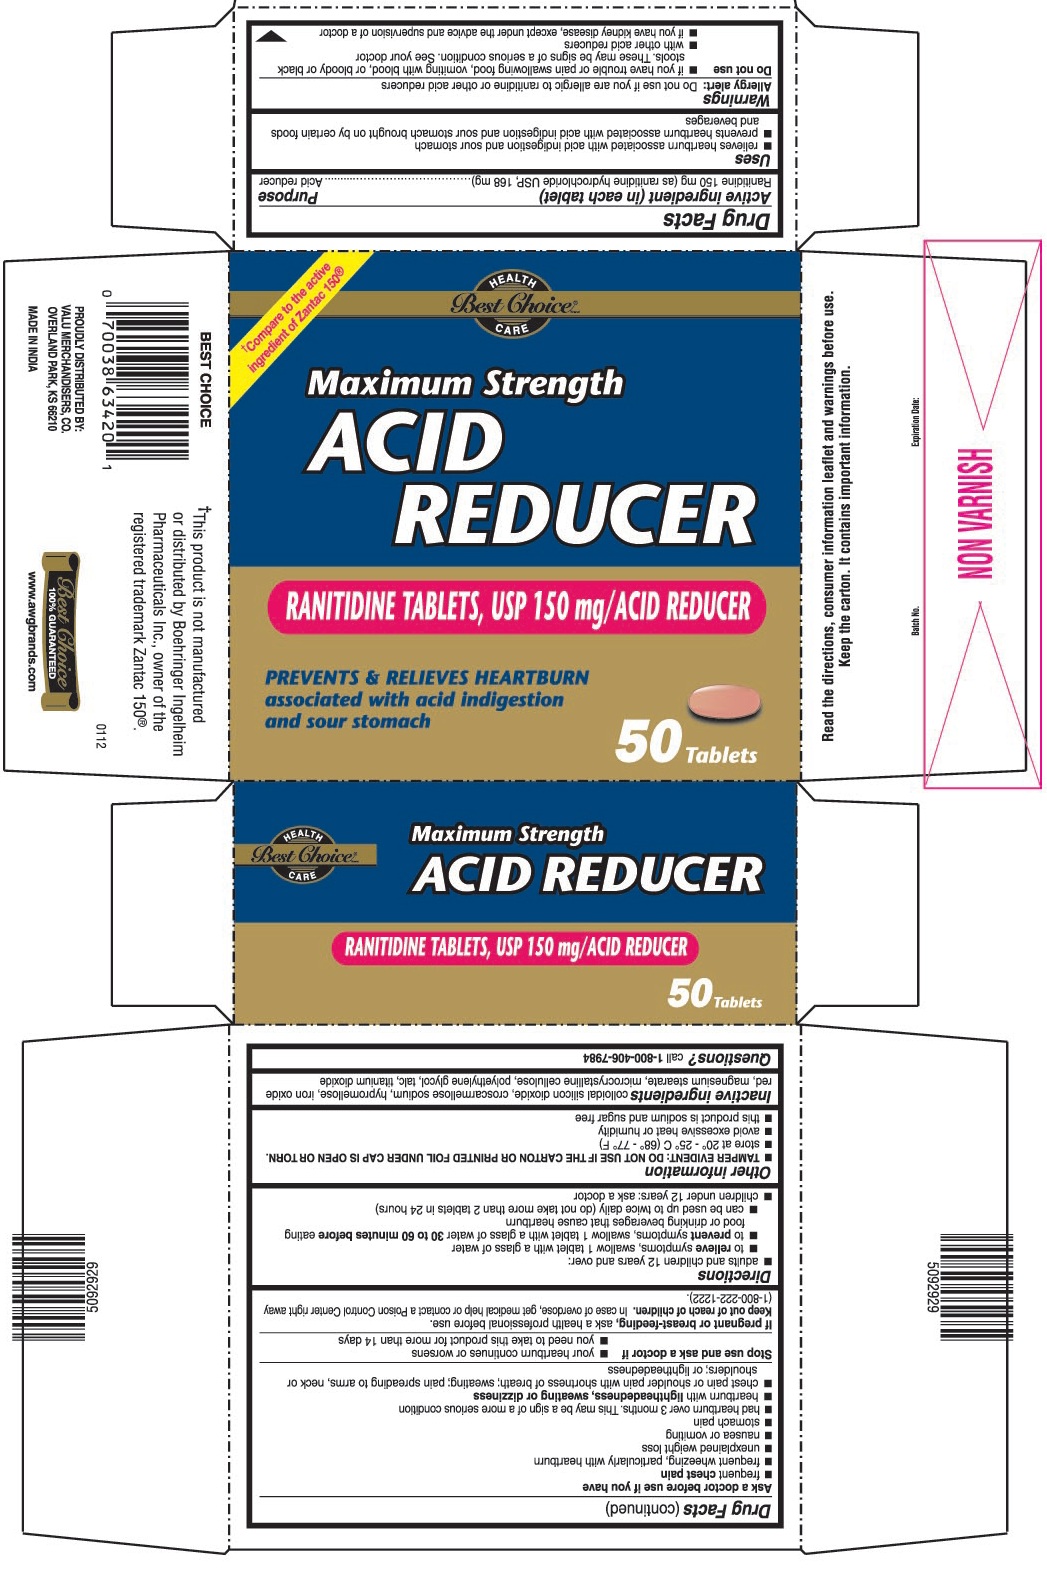 This is the 50 count bottle carton label for Best Choice Ranitidine tablets, USP 150 mg.